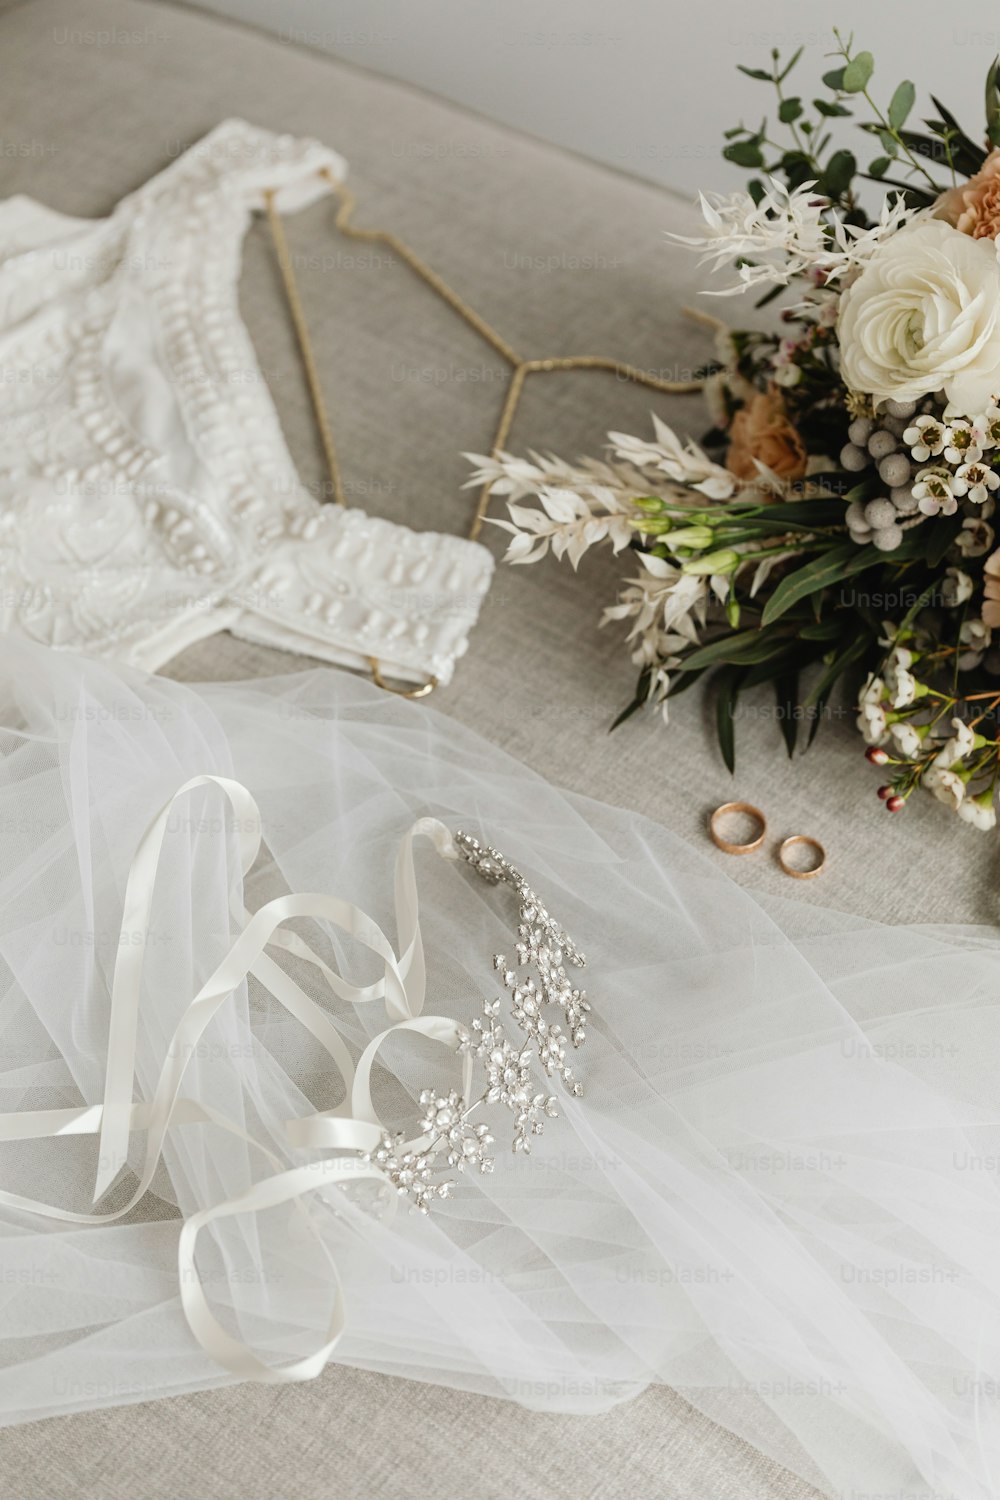 a bouquet of flowers and a wedding dress on a couch